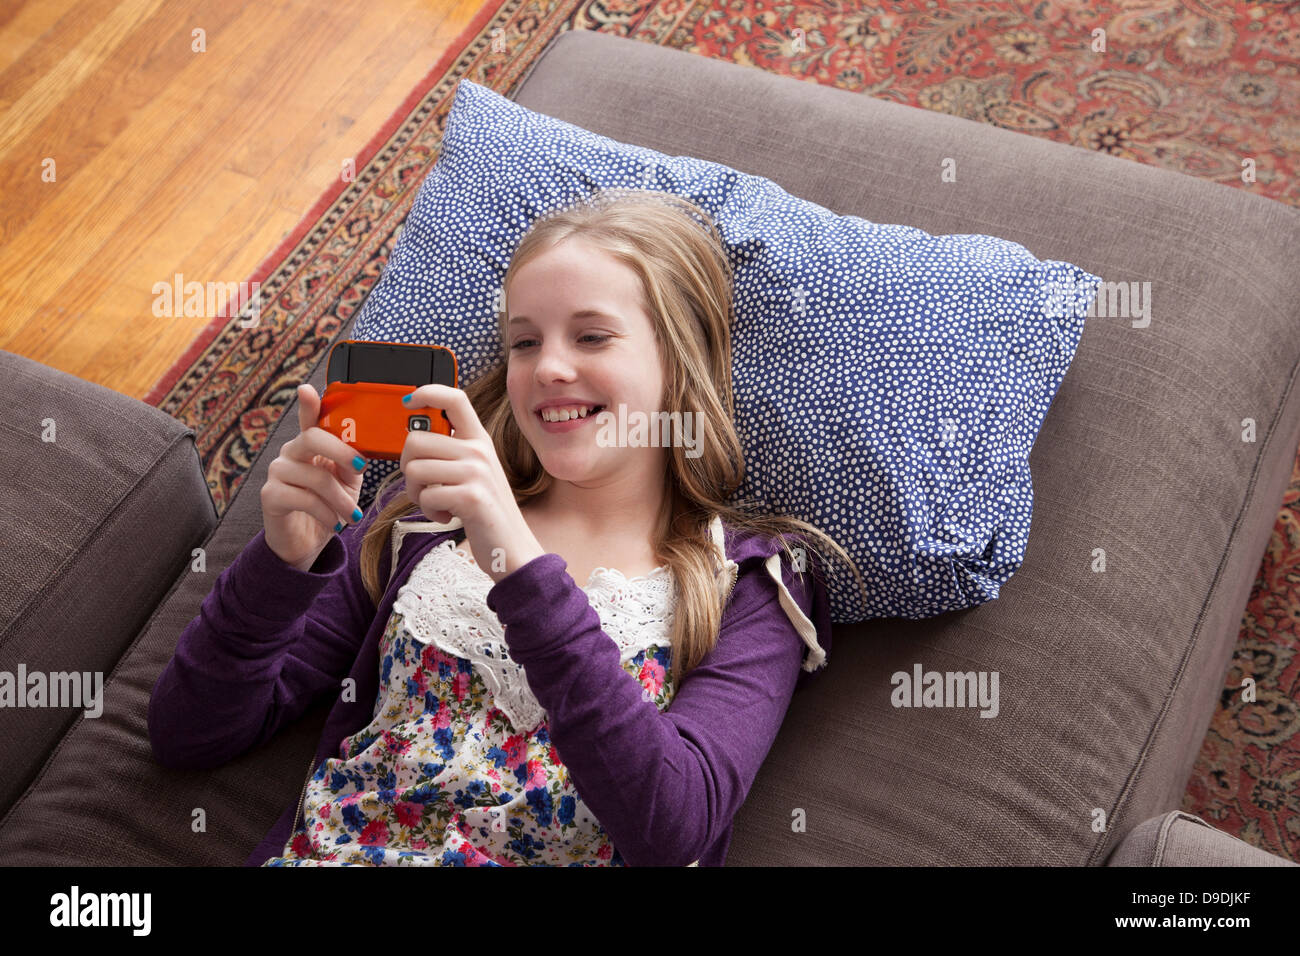 Girl lying on sofa playing handheld video game Banque D'Images